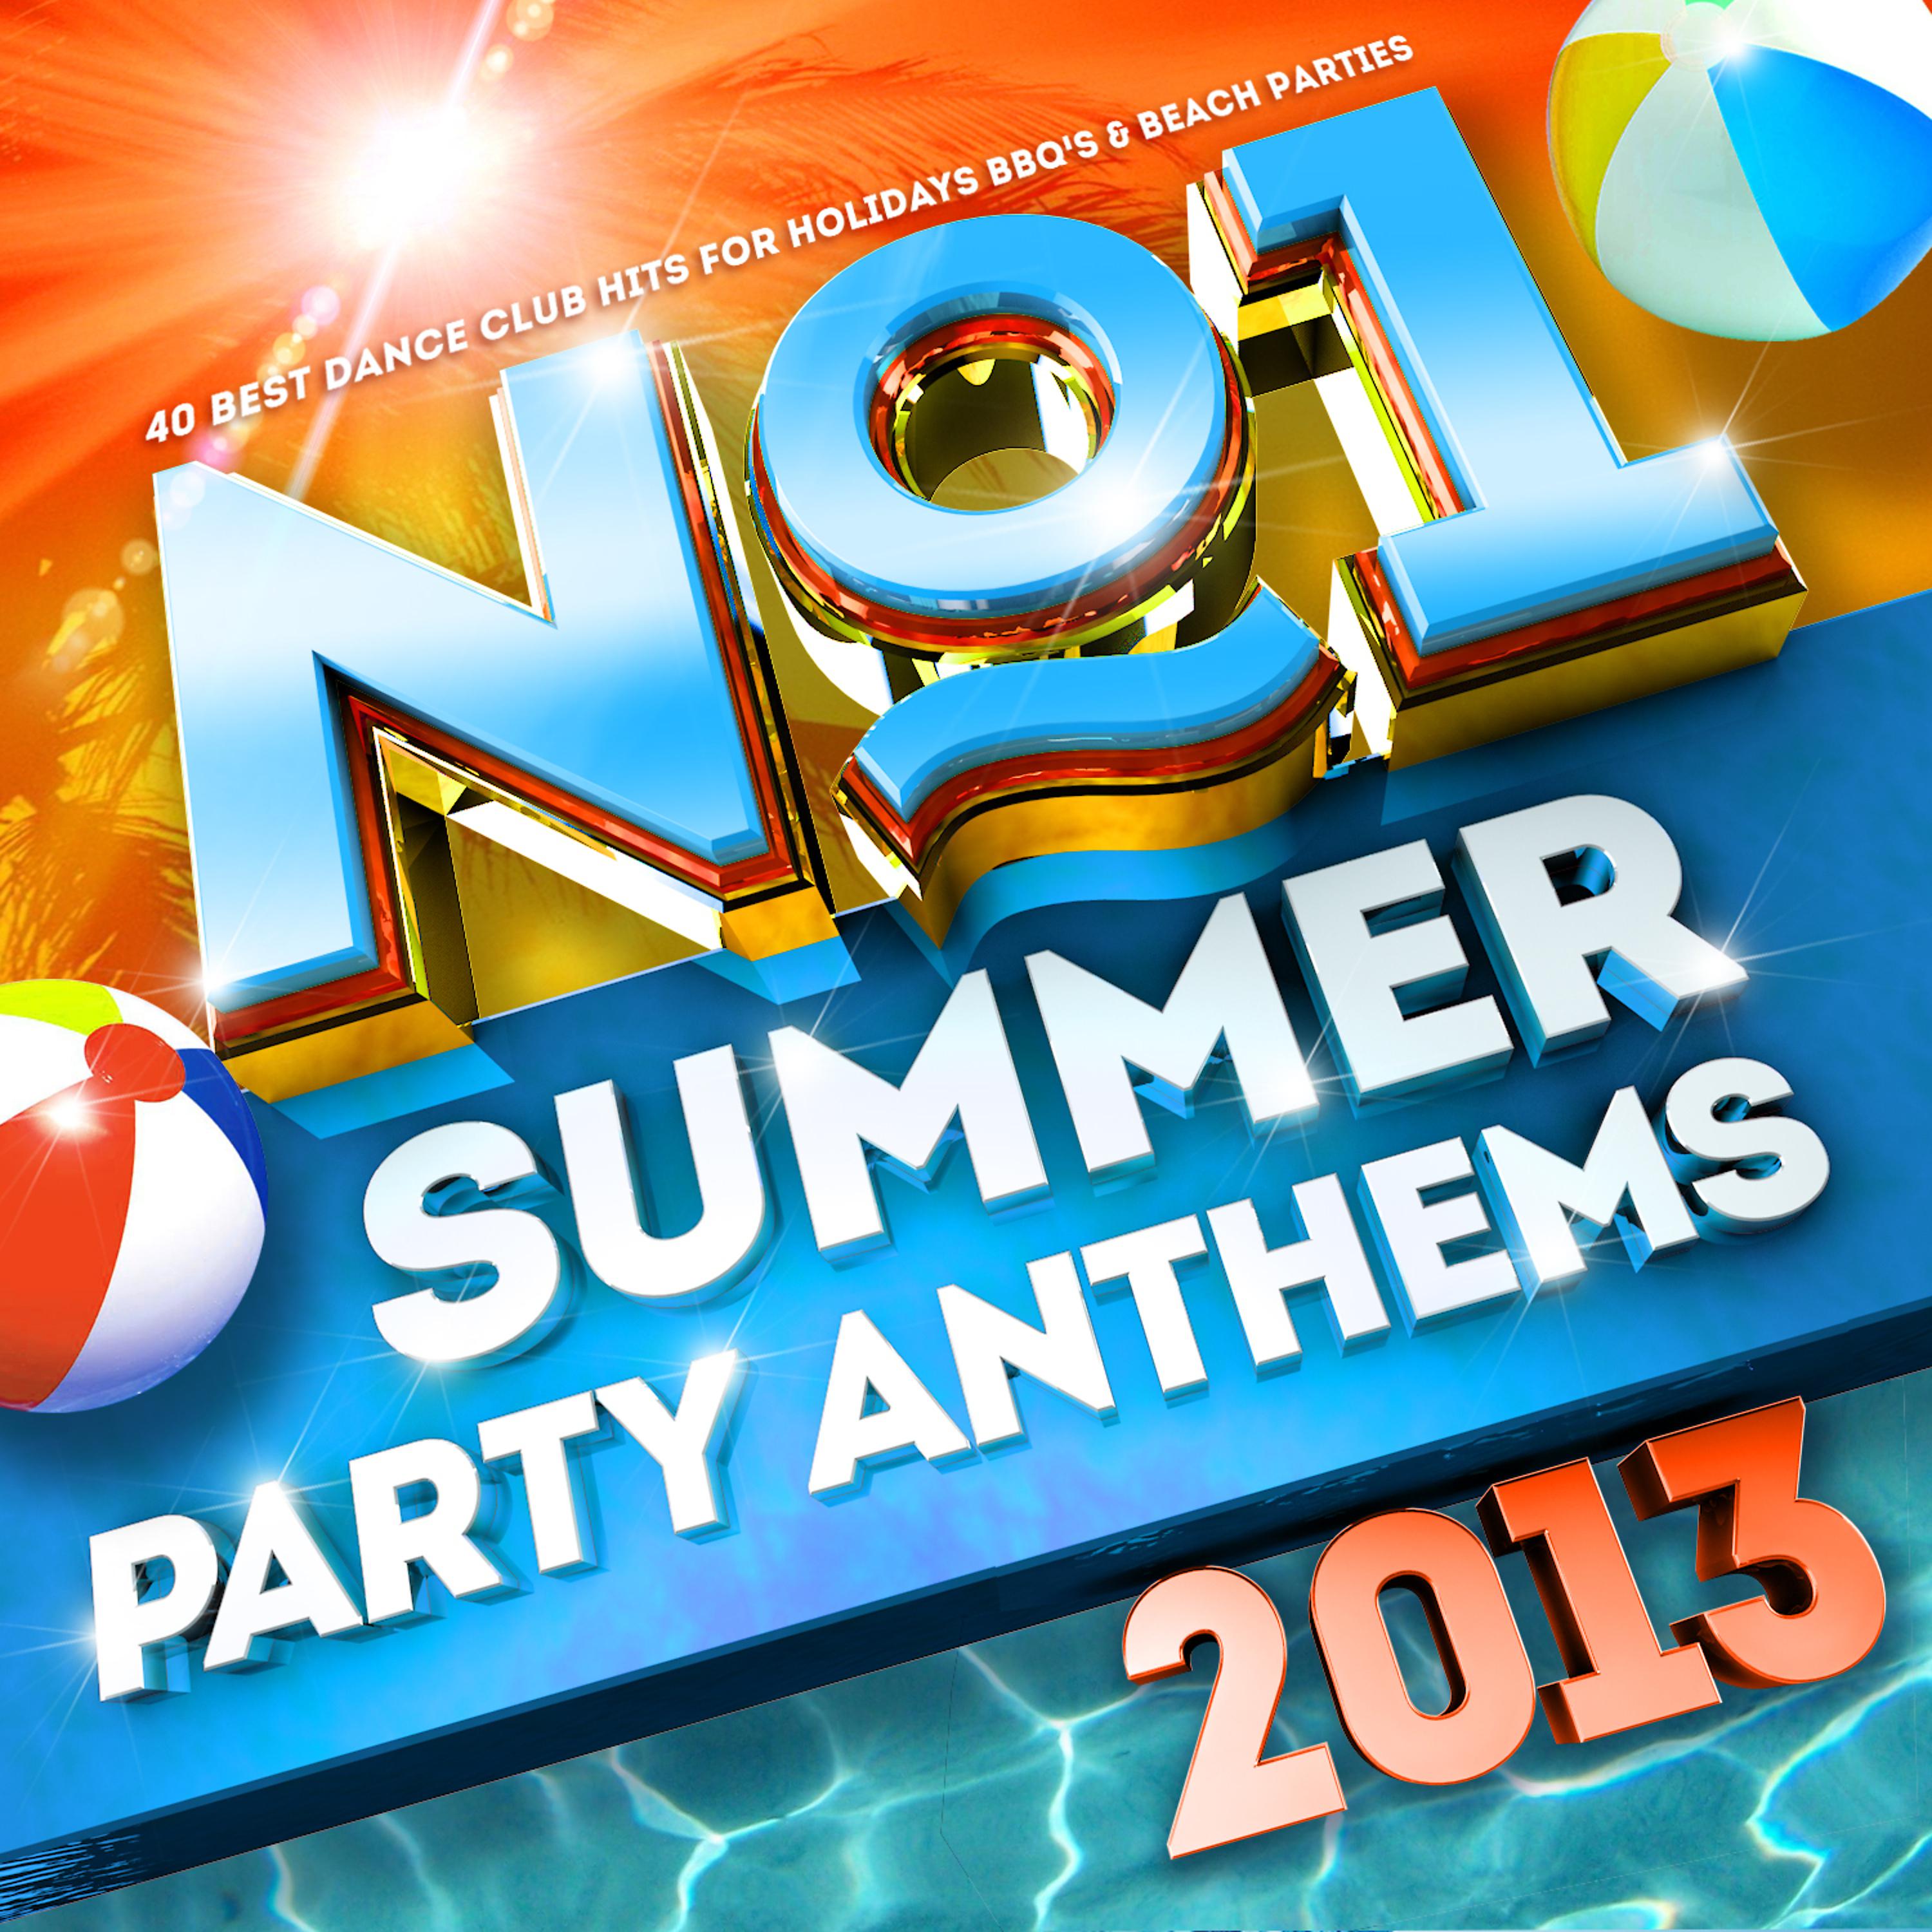 Постер альбома No.1 Summer Party Anthems 2013 - 40 Best Dance Club Hits for Holidays BBQ's & Beach Parties